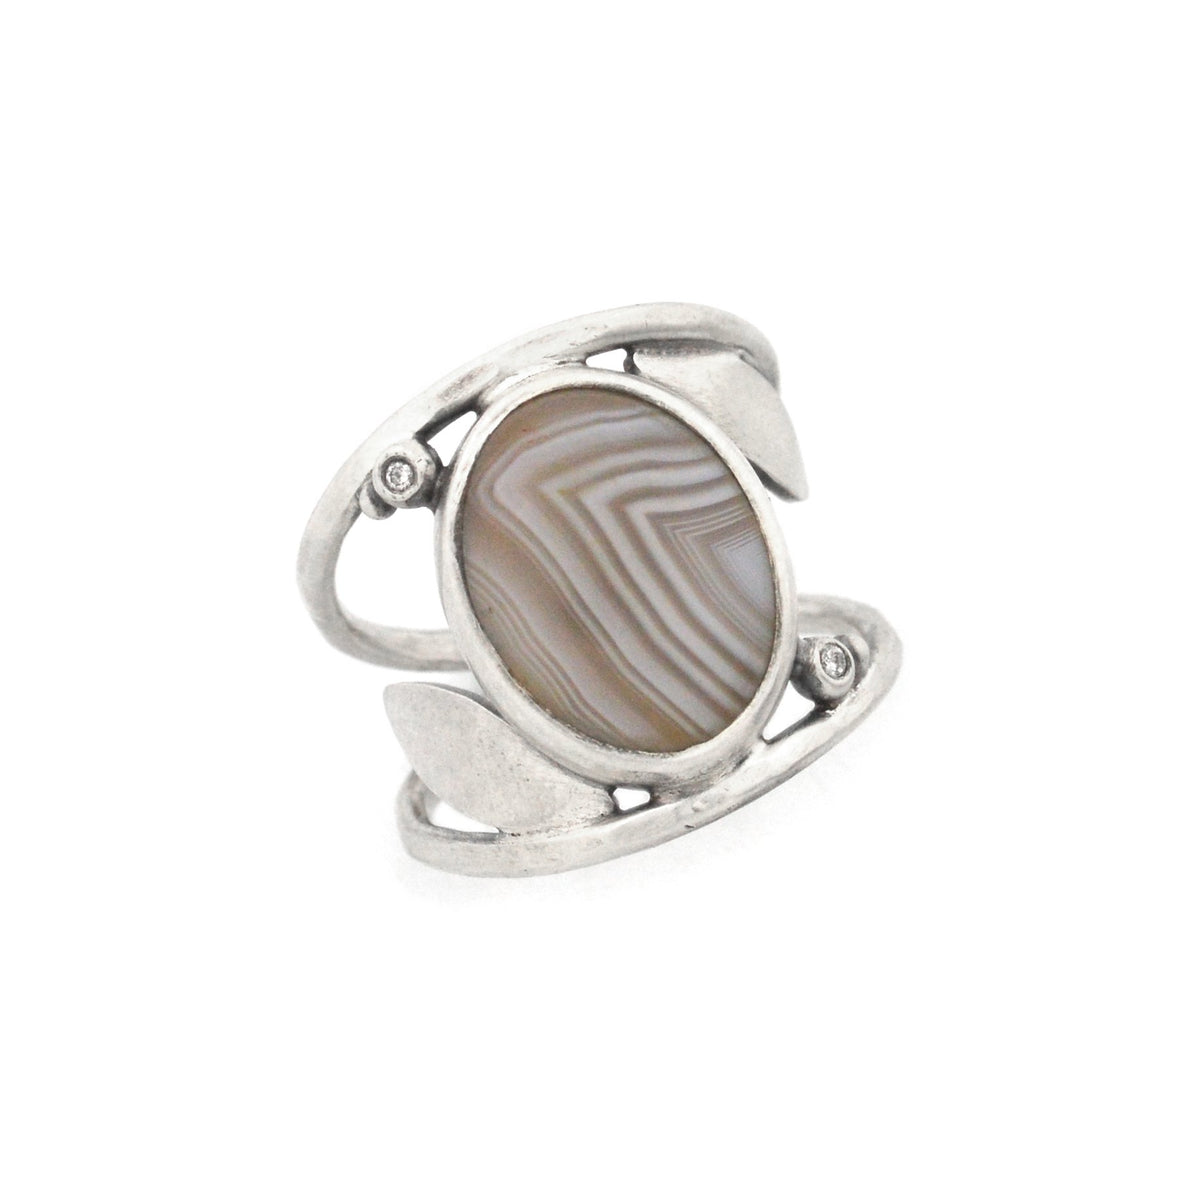 Copper Agate Ring - Choose Your Own Stone